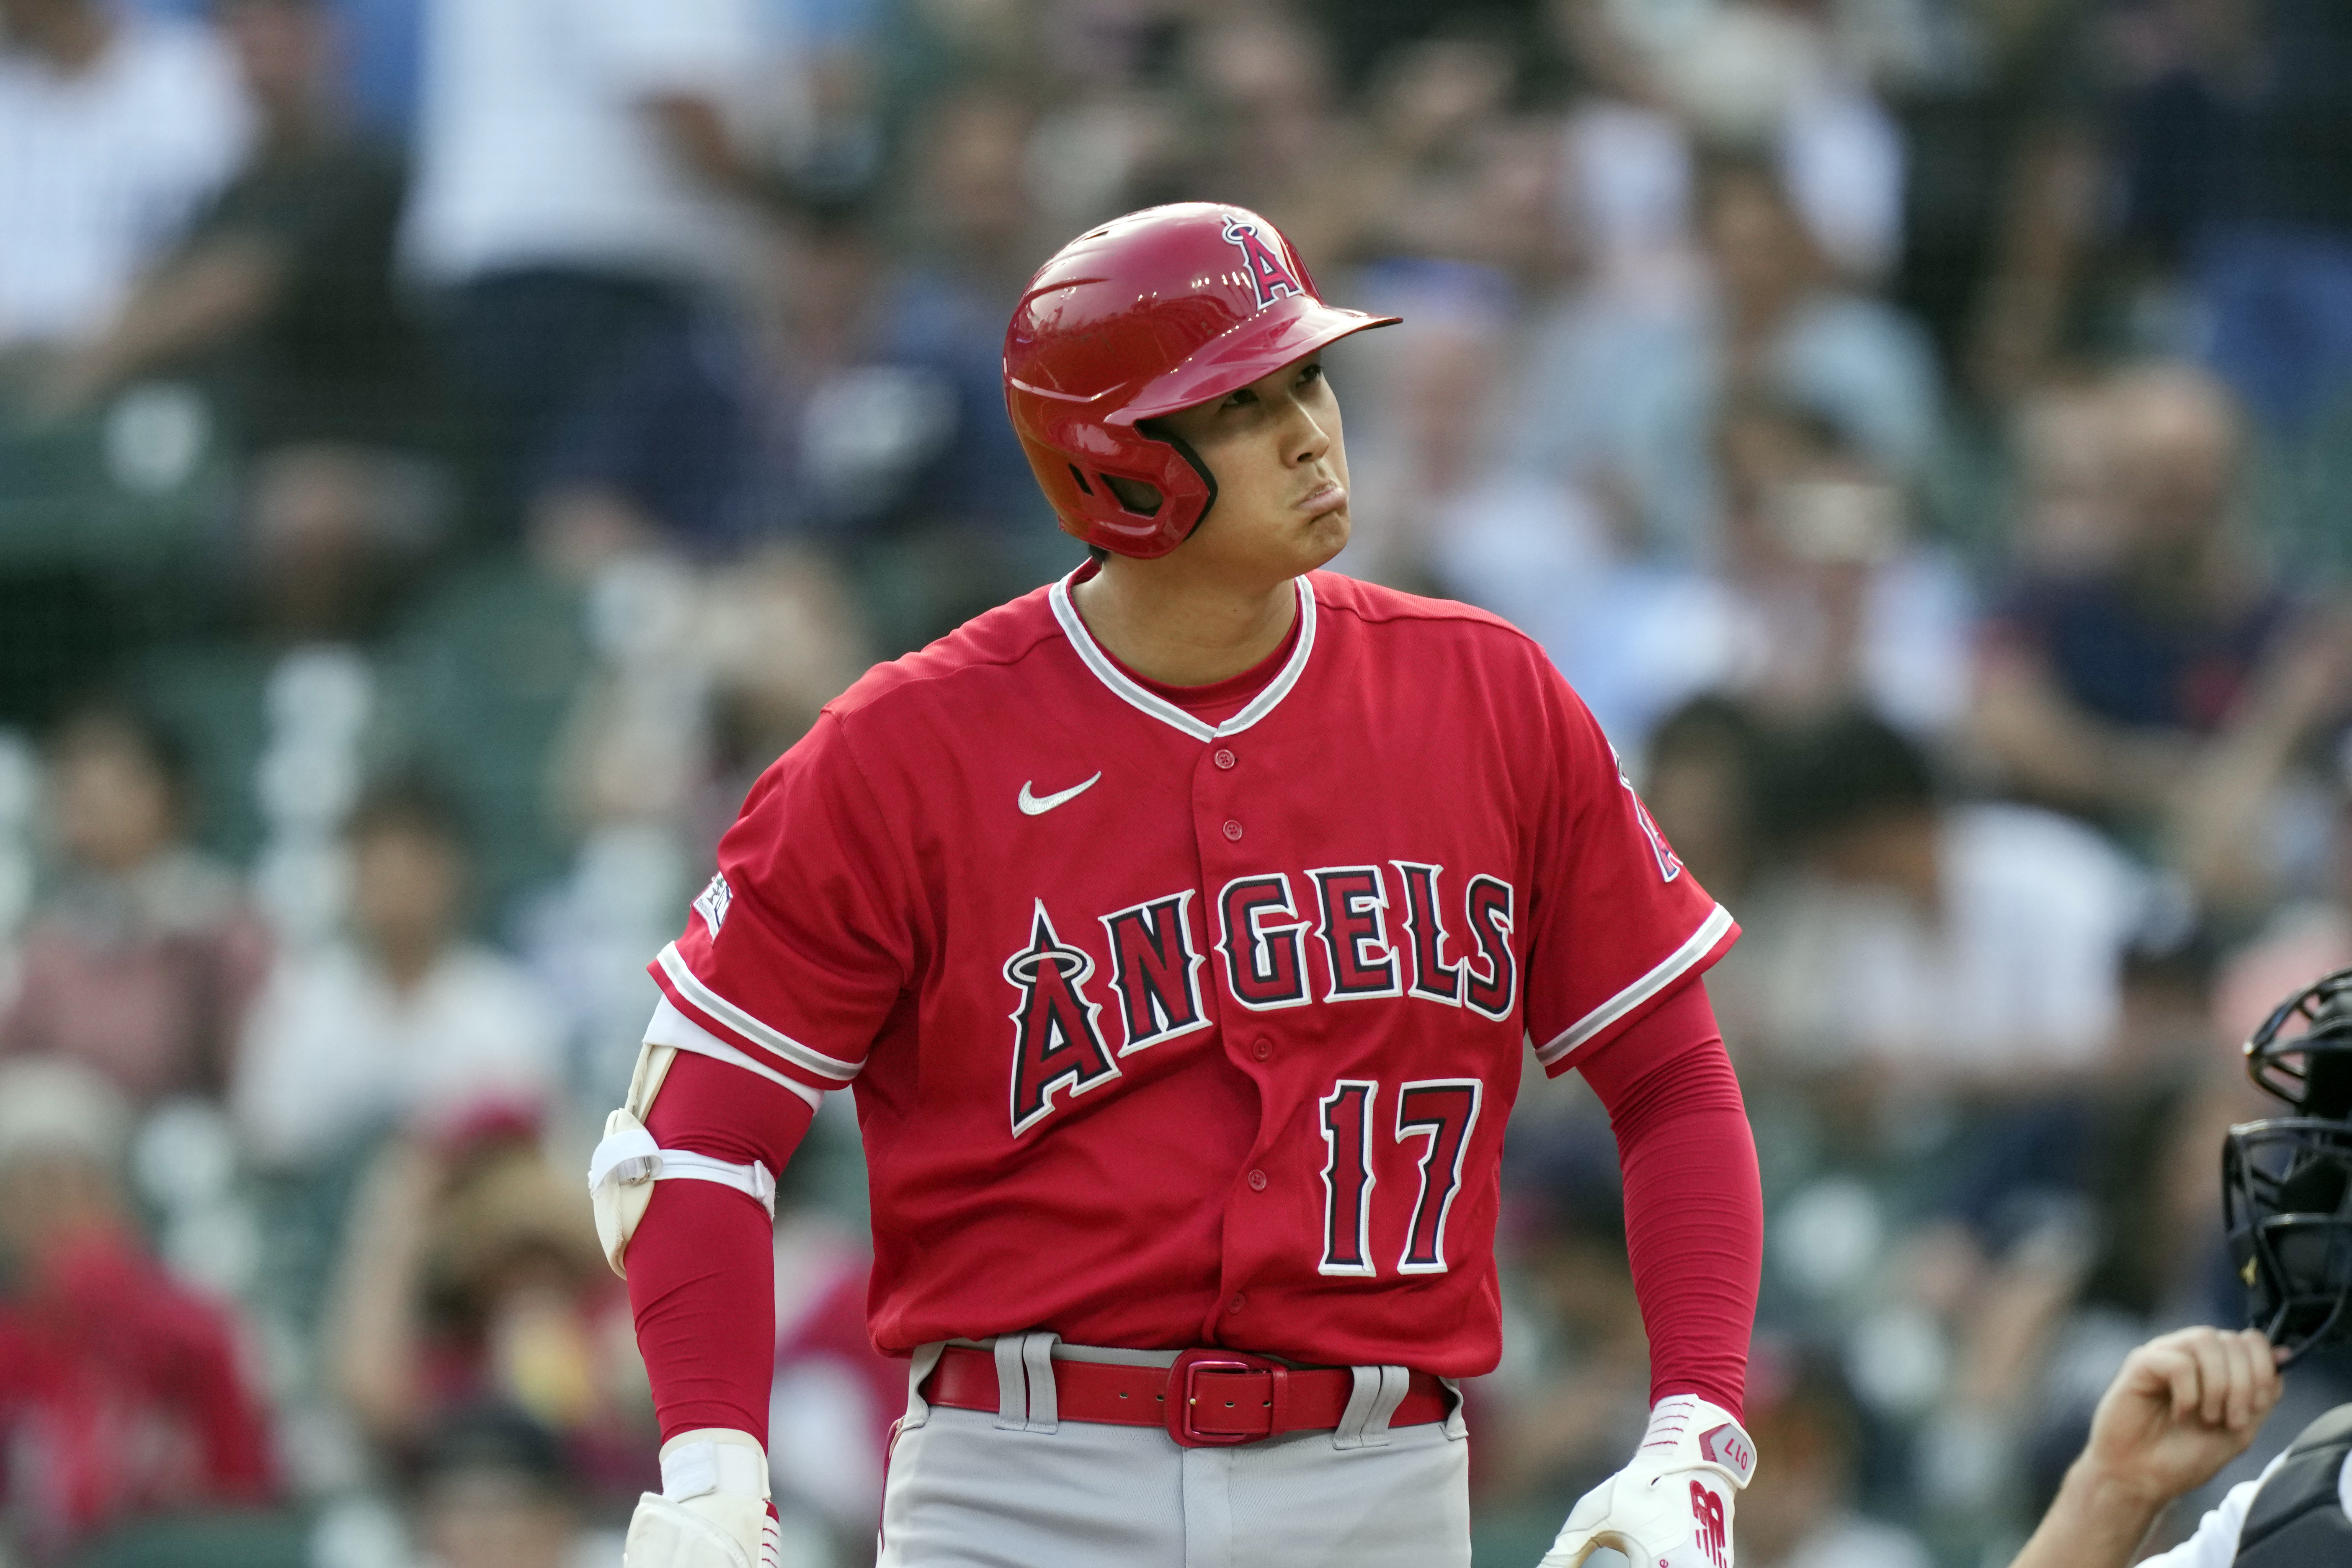 Shohei Ohtani ready to lead Angels, MLB once again - Sports Illustrated